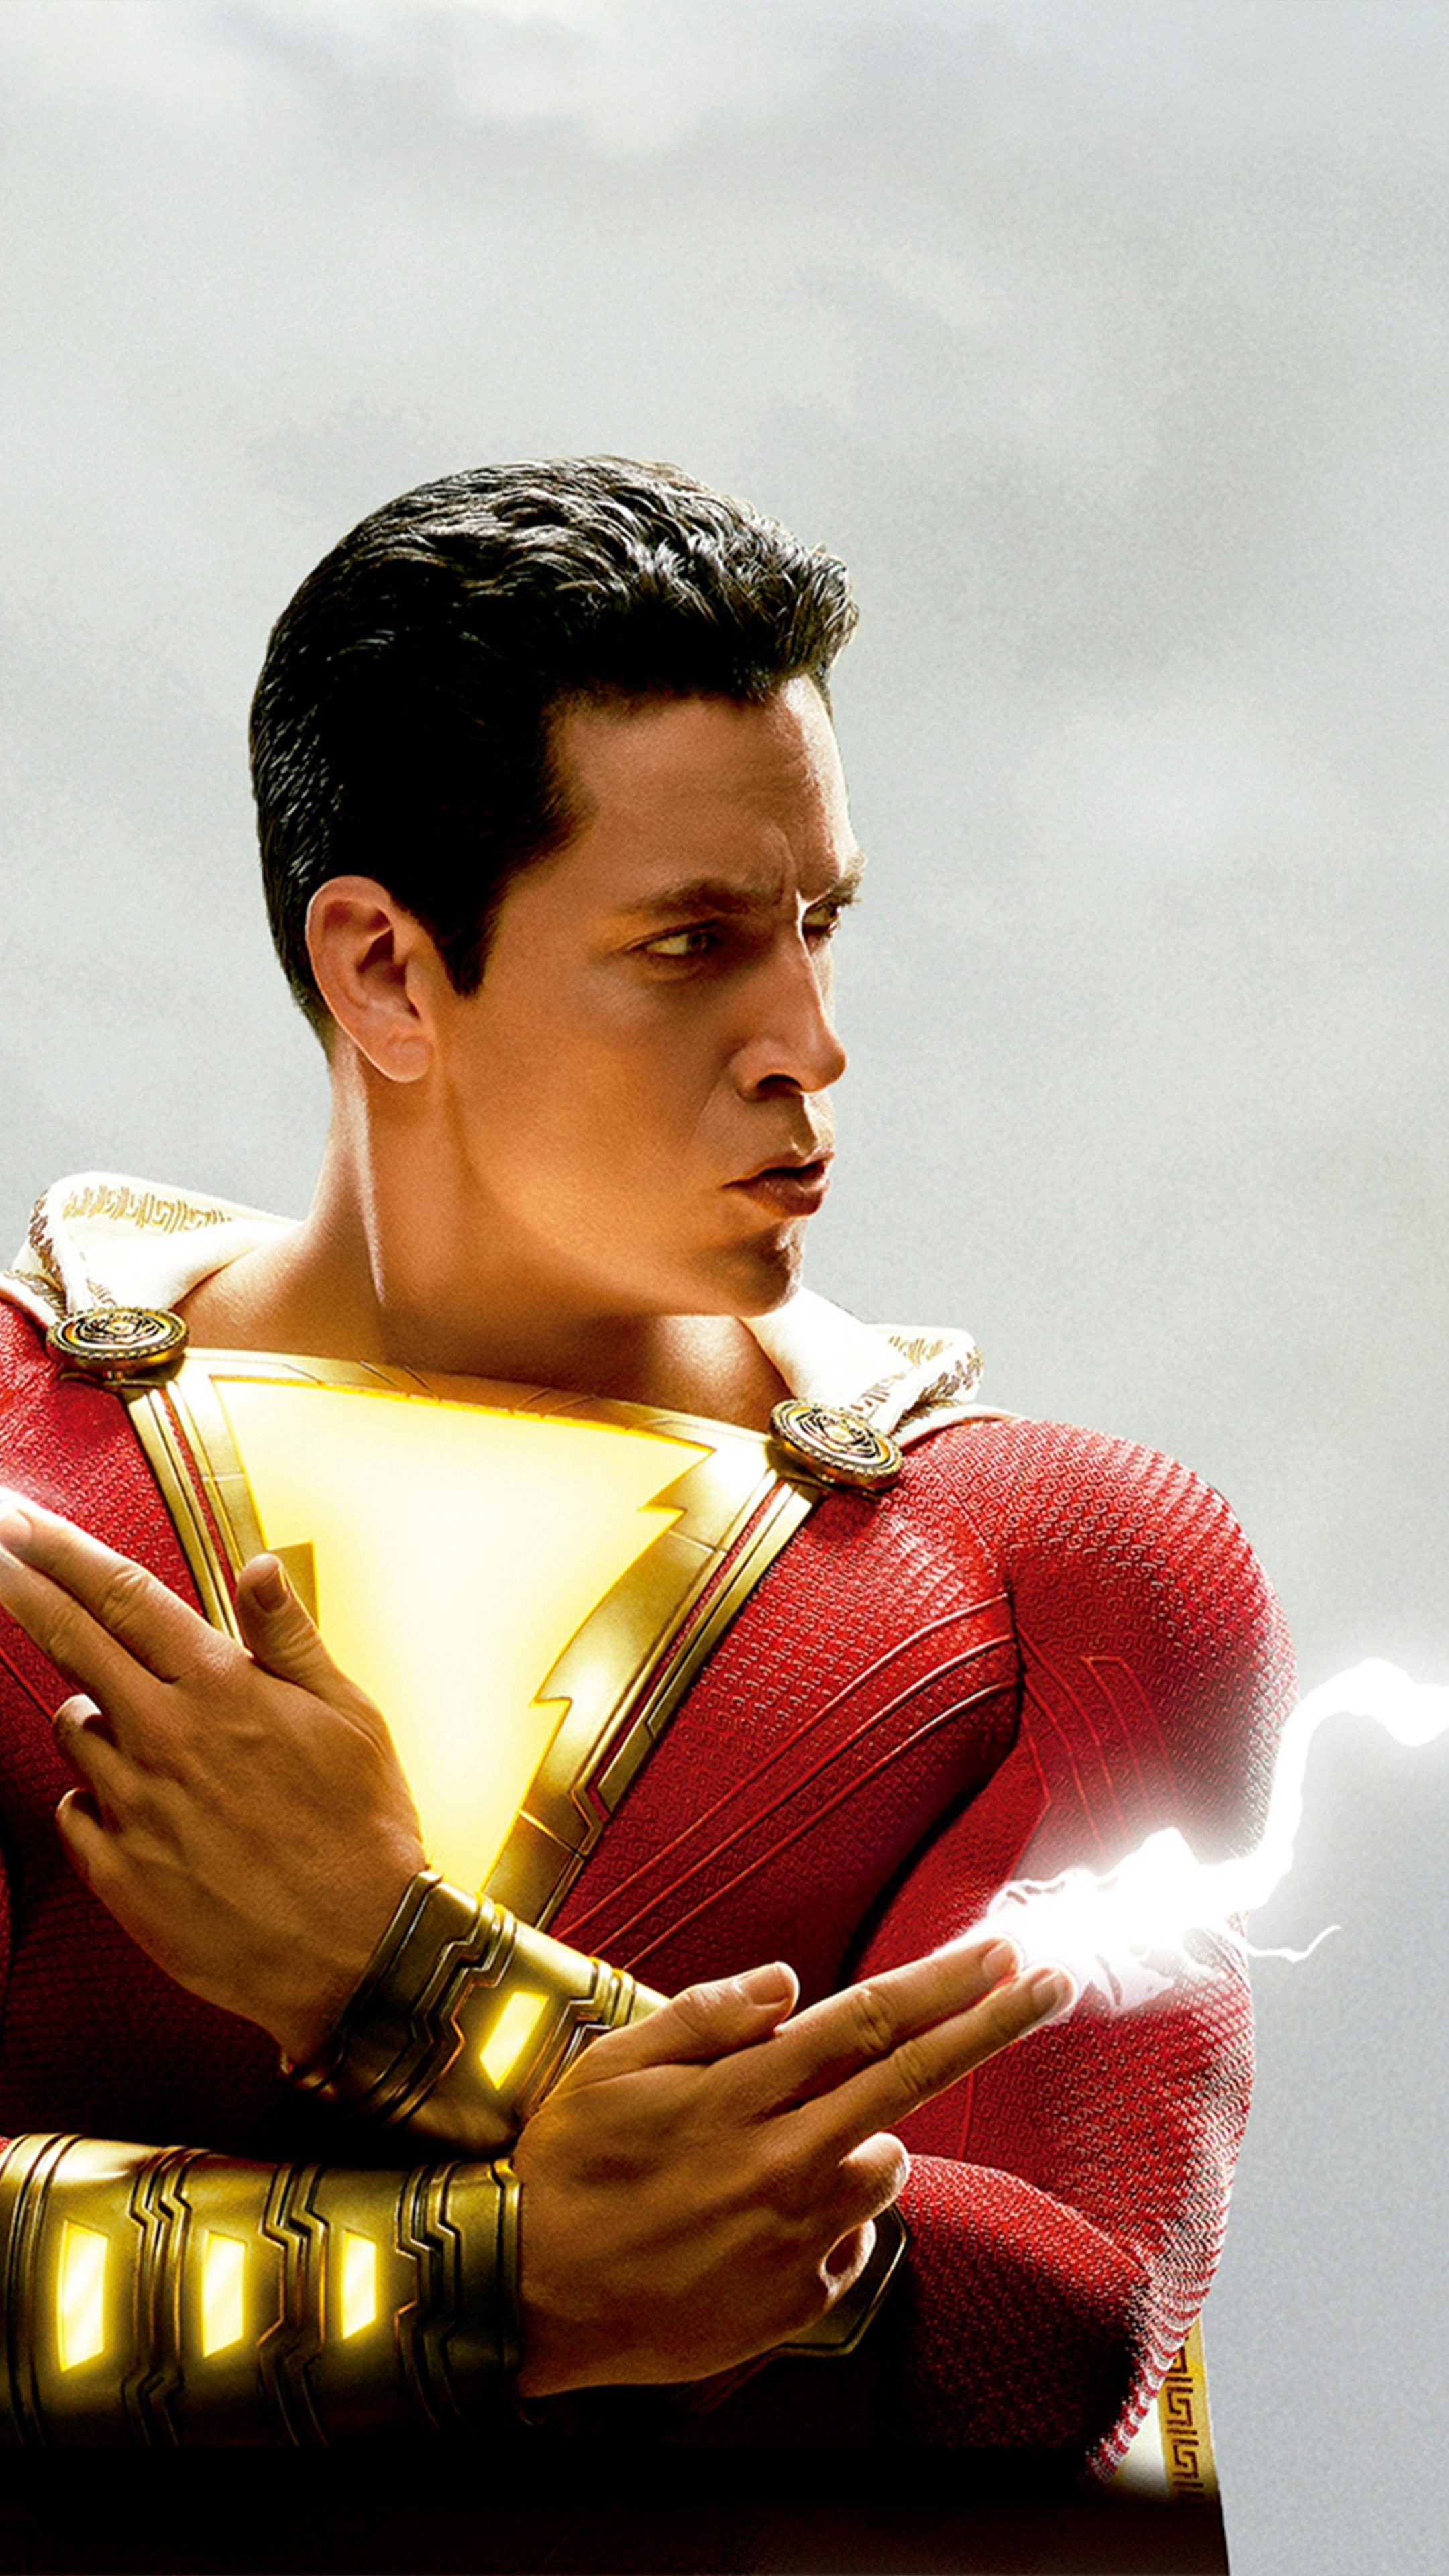 Shazam! exceeds audience expectations with lighthearted 